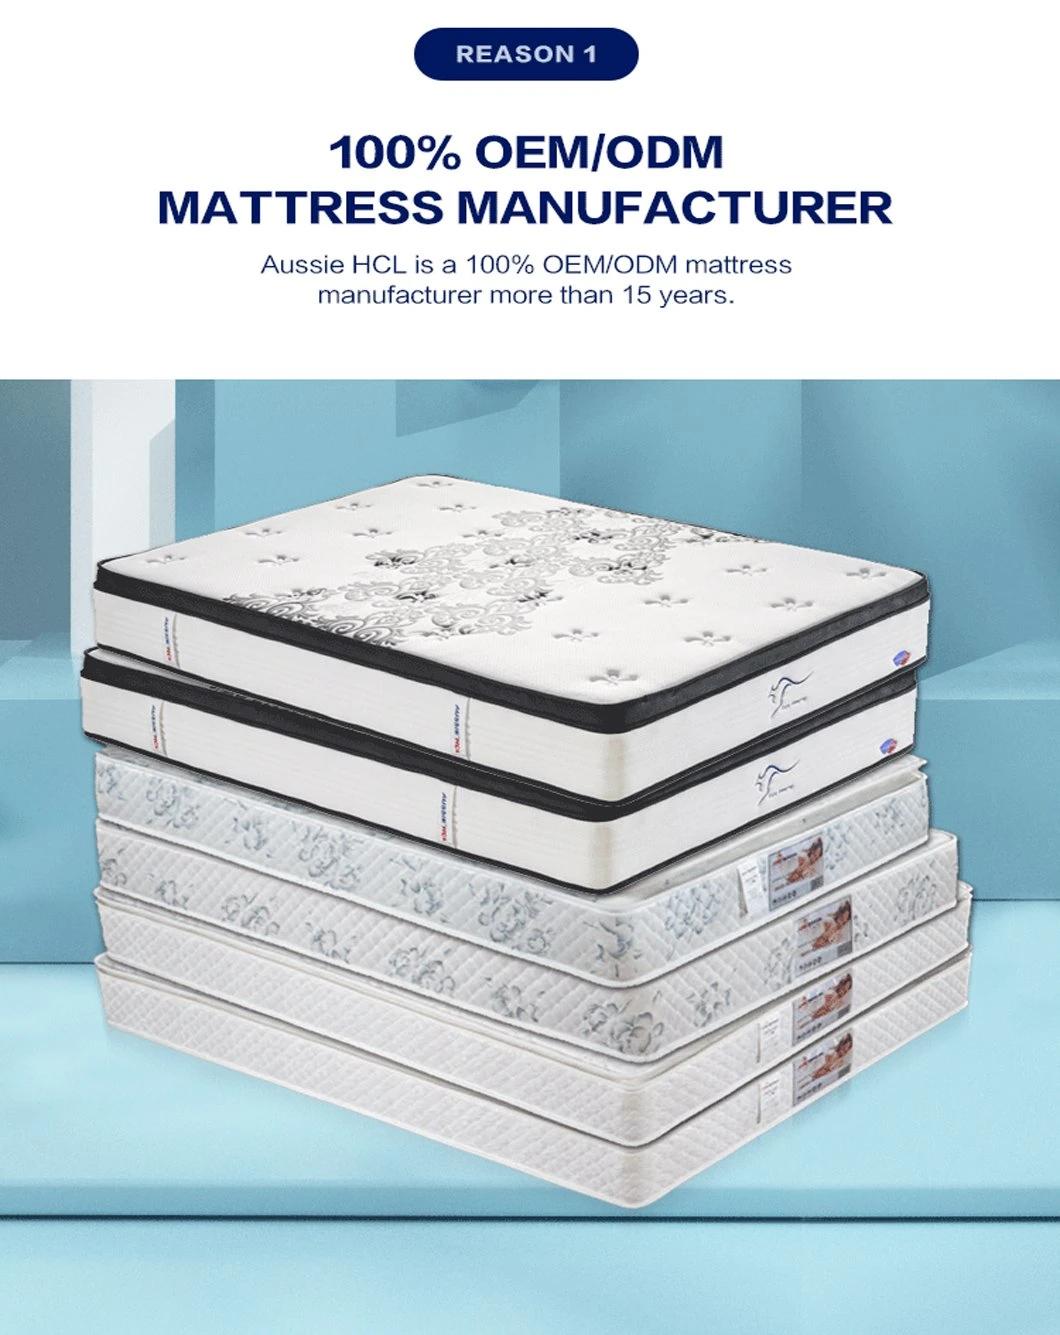 Premium King Size Medium Firm with Breathable Soft Fabric Cover Cool Gel Infused Foam Mattress